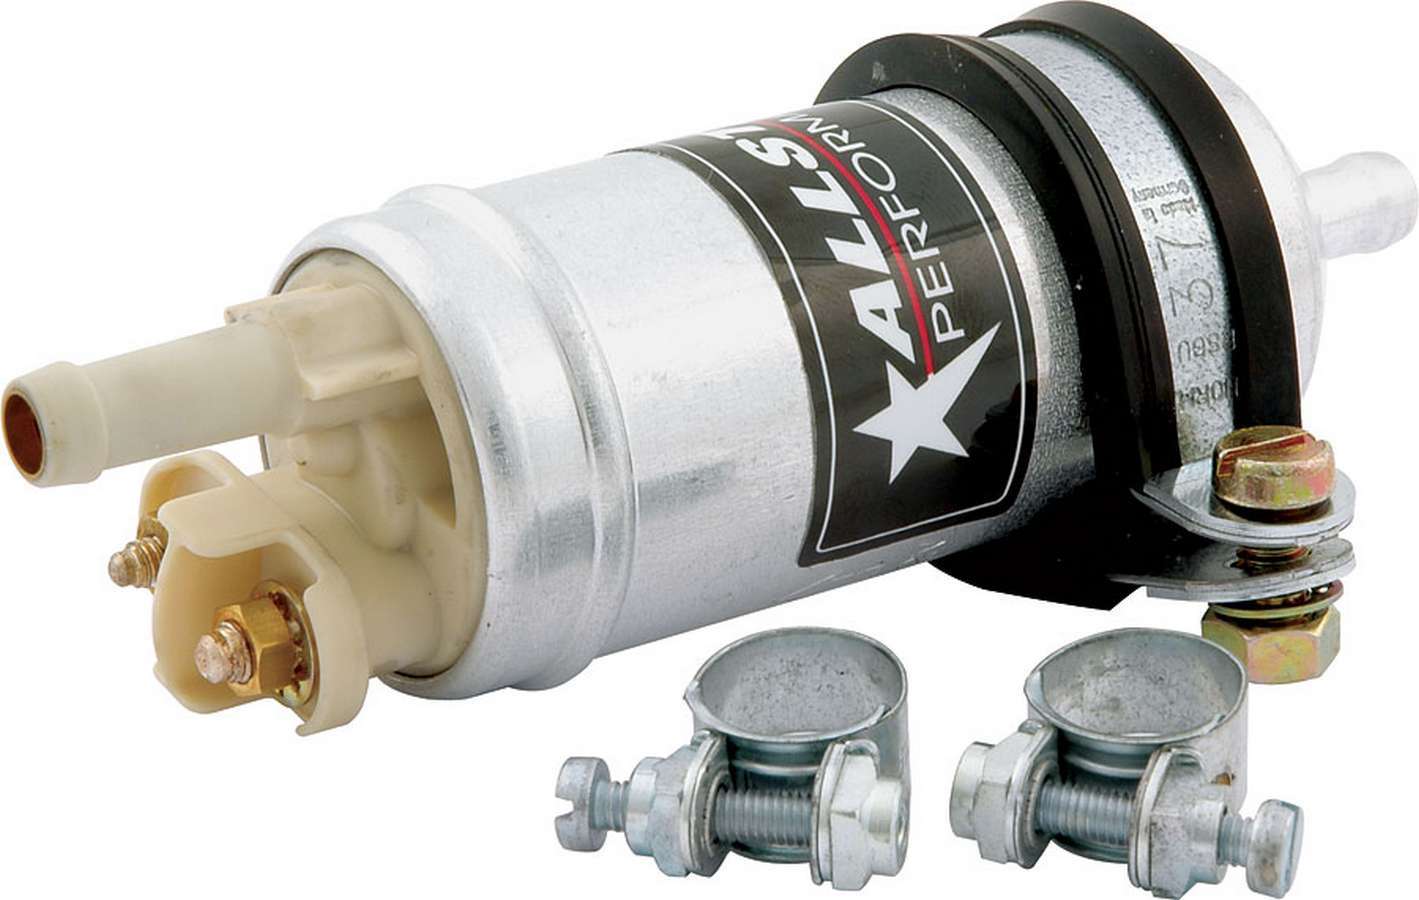 Fuel Pump - Compact - Electric - In-Line - 18 gph at 4 psi - 5/16 in Hose Barb Inlet / Outlet - Silver - Gas - Each